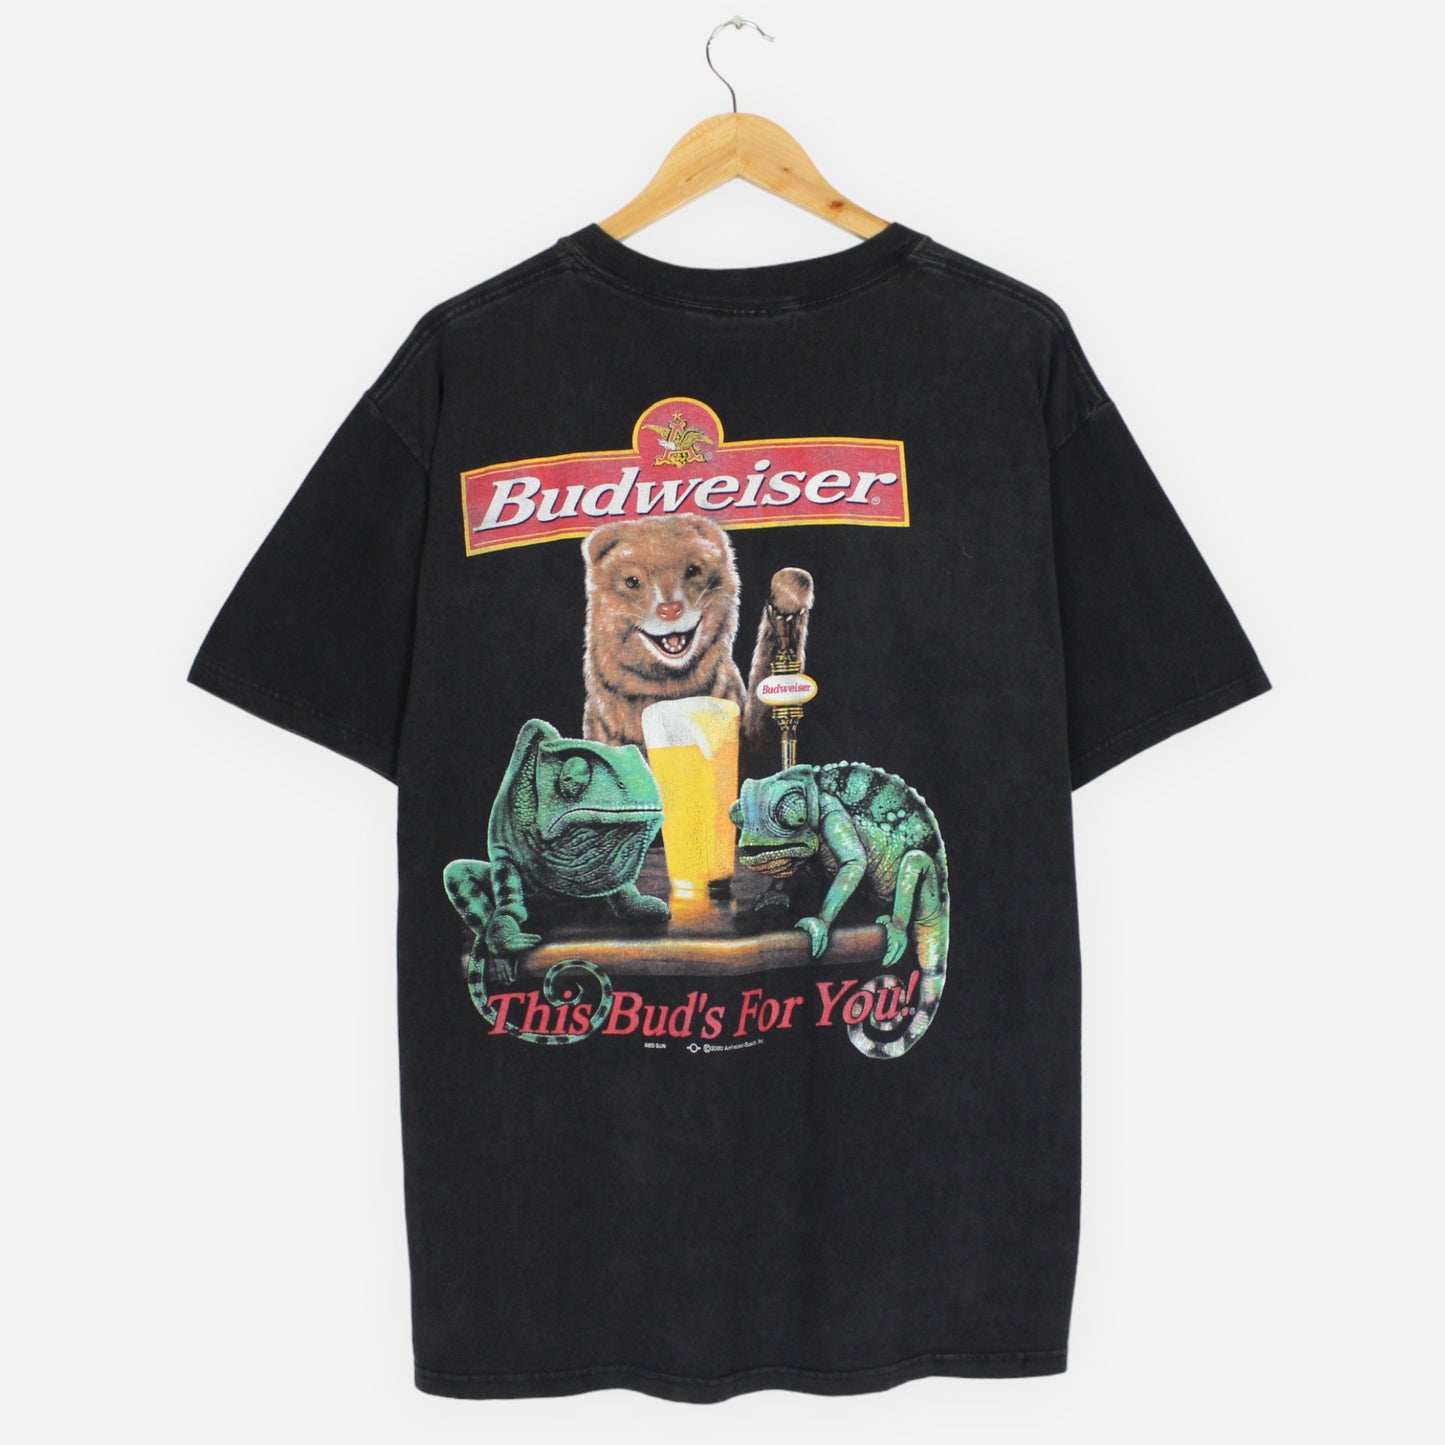 Vintage 2000 Budweiser 'This Bud's For You' Tee - L